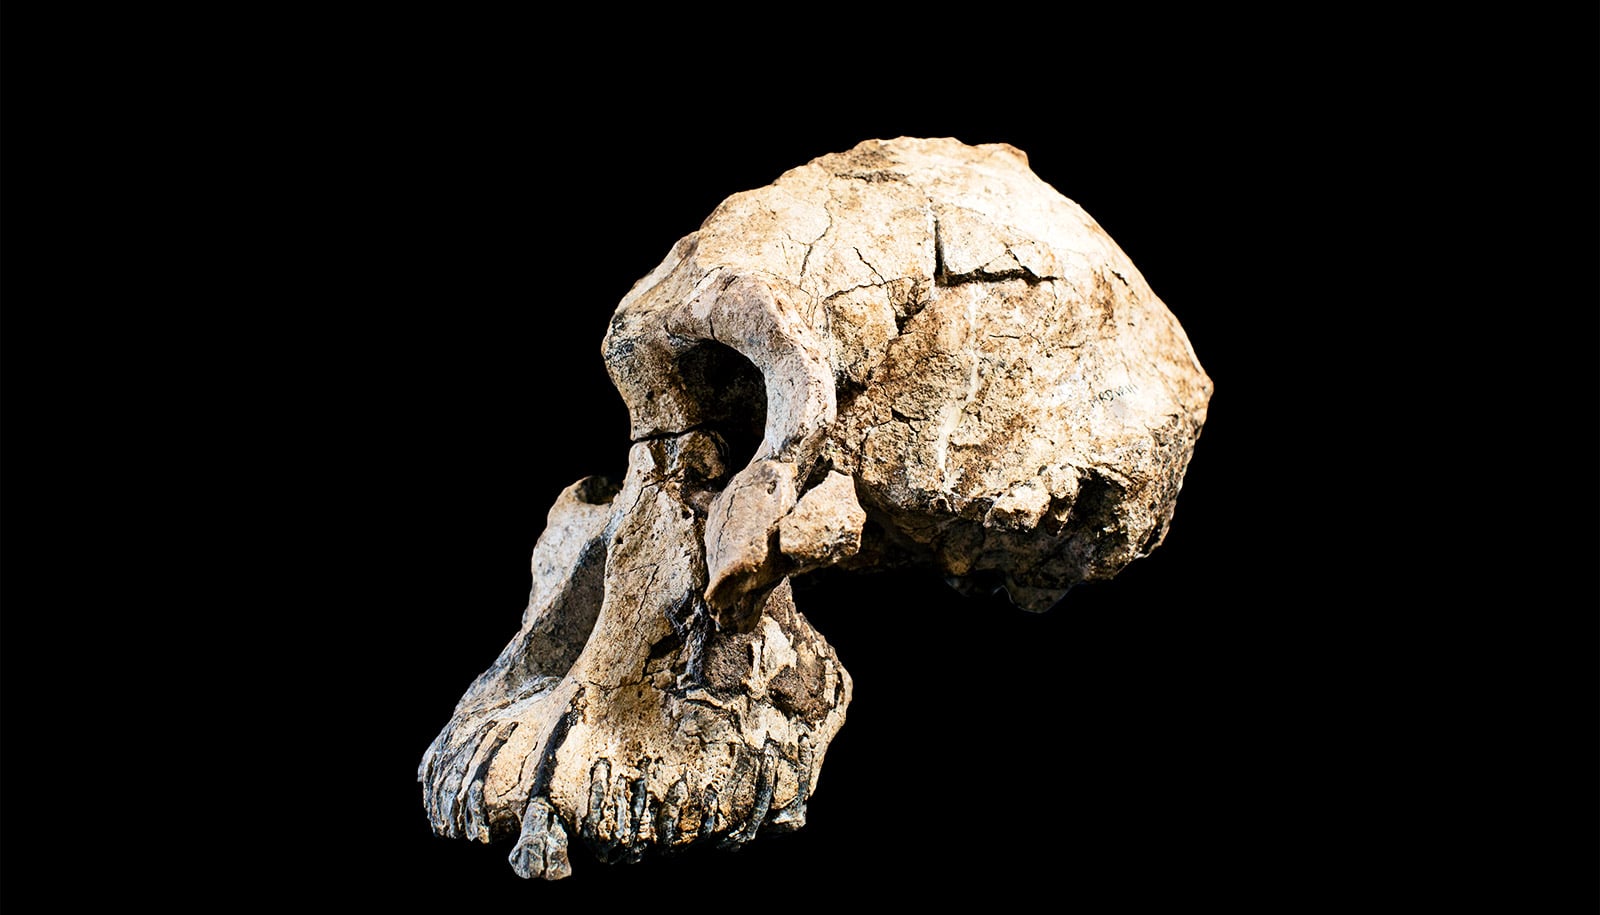 The skull is shown at a side view, the teeth set far forward from the forehead